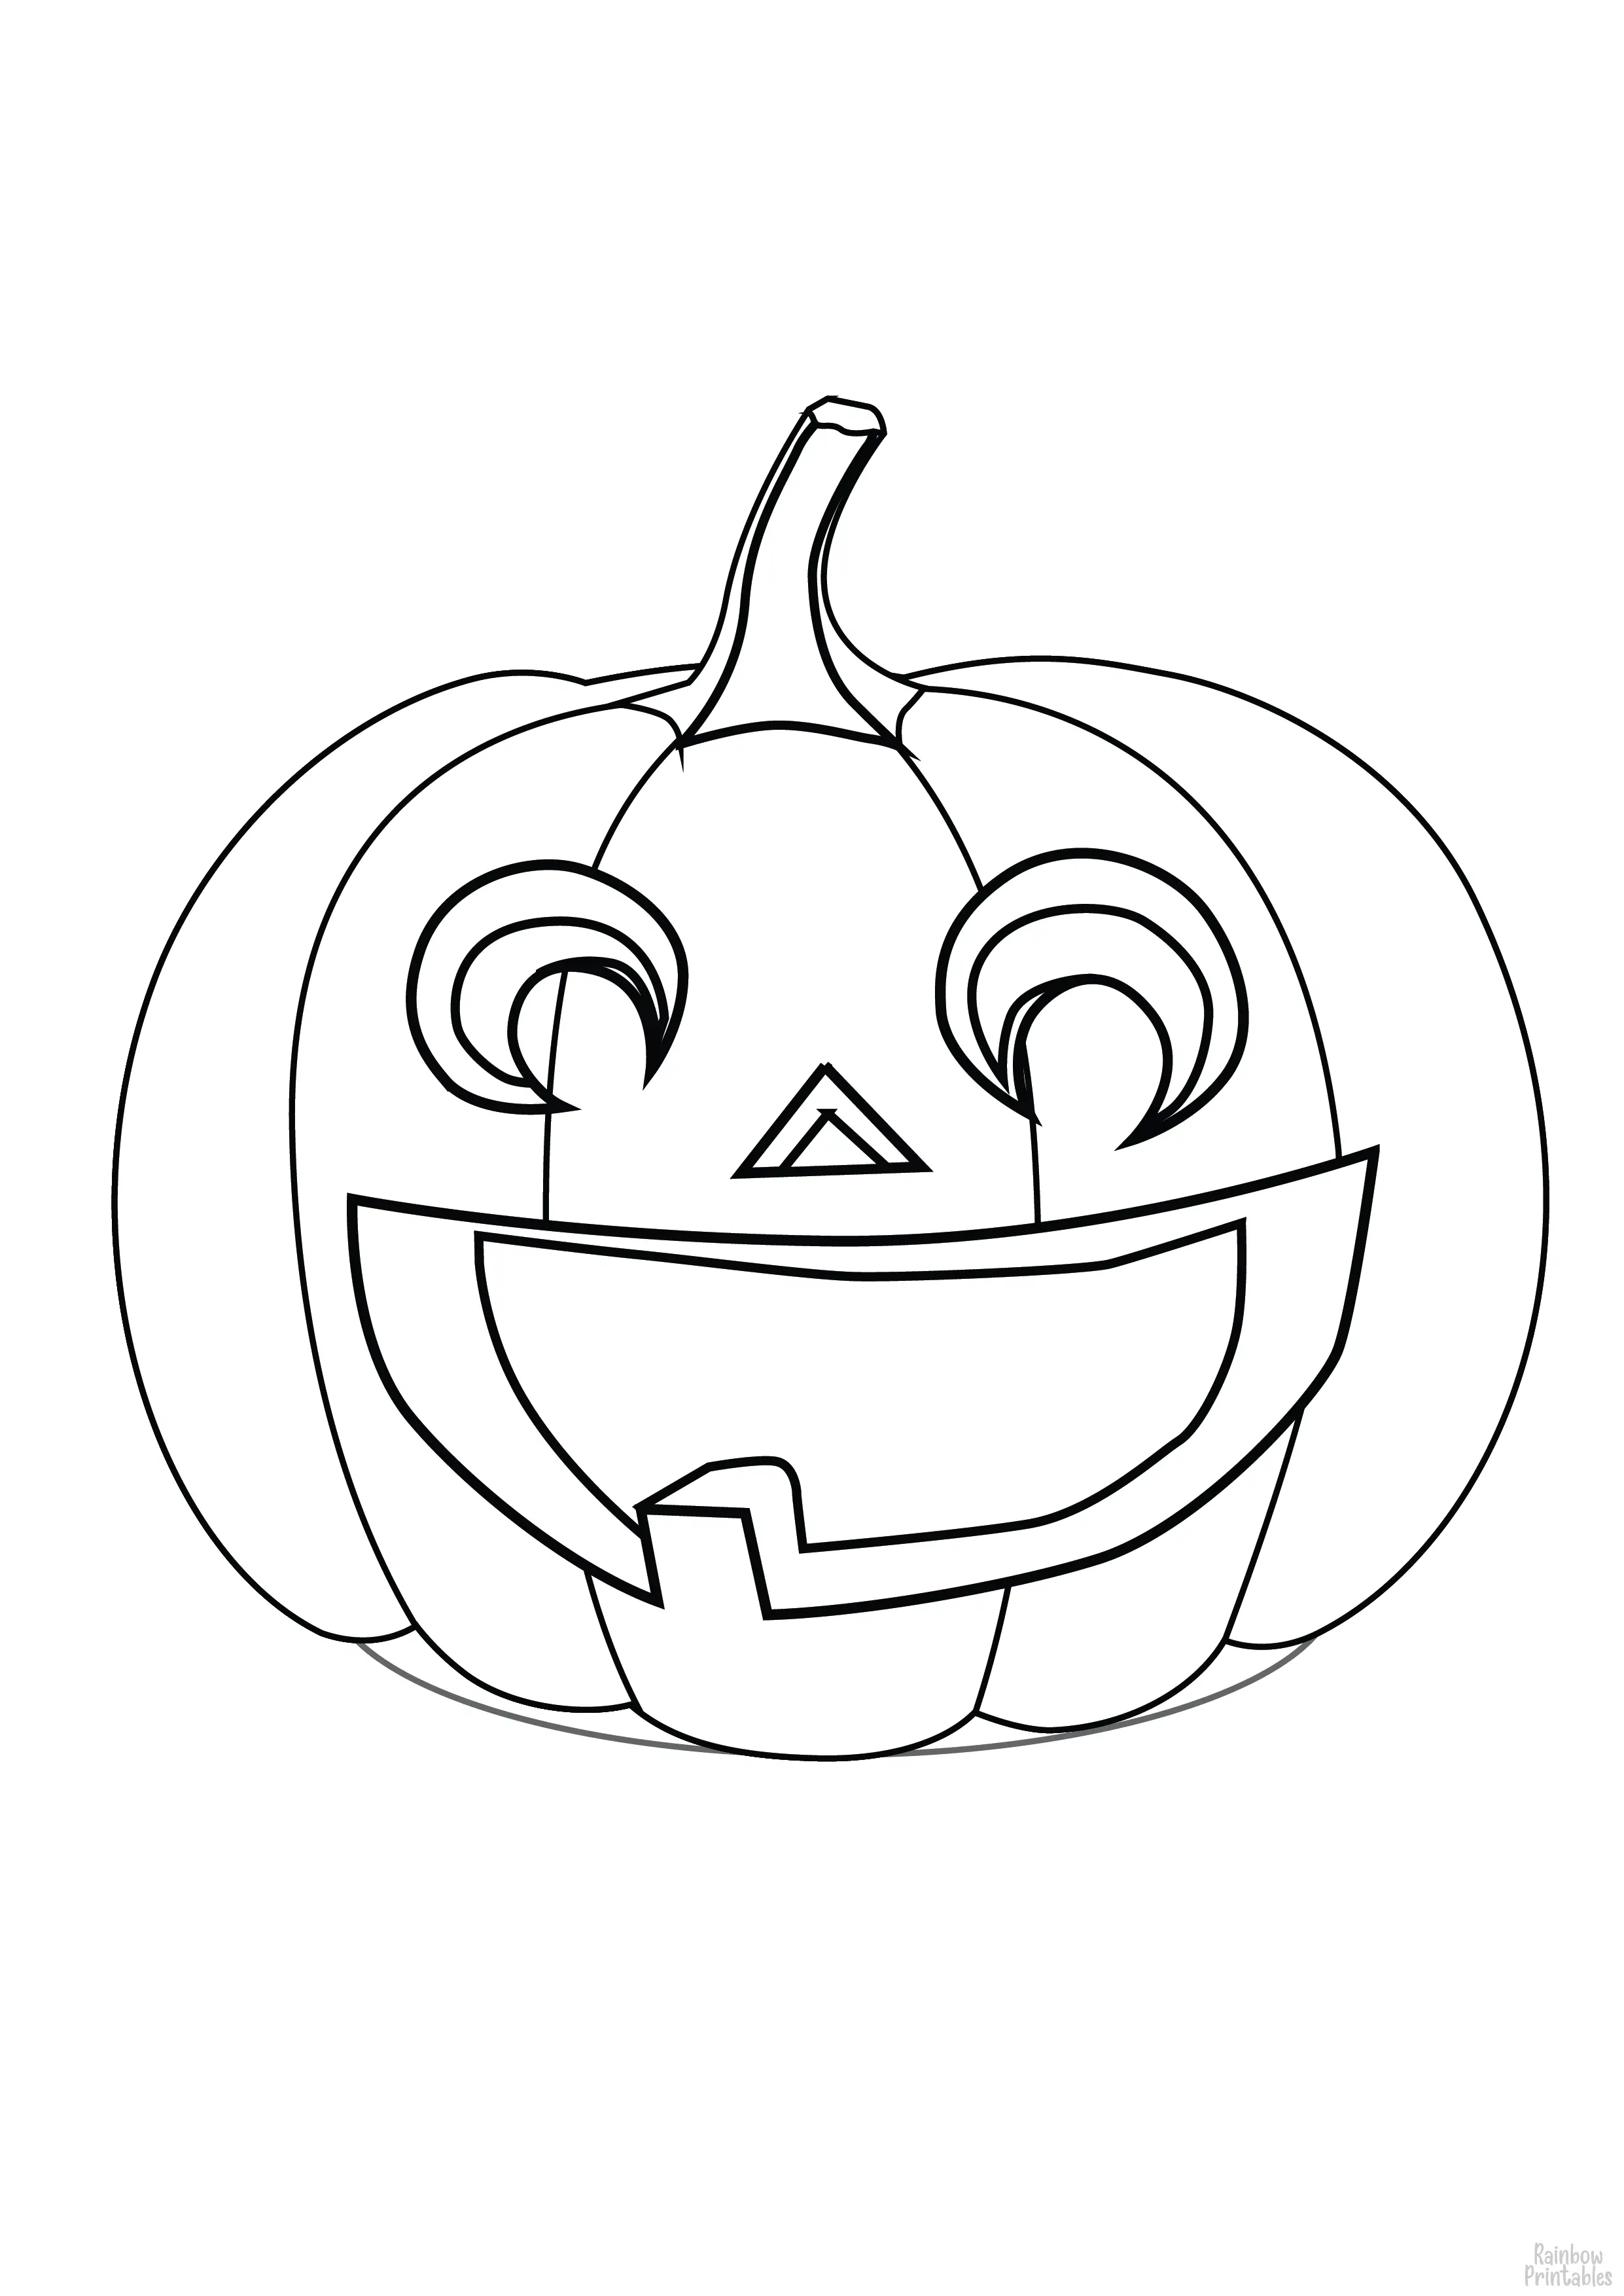 HAPPY SMILING JACK O LATERN PUMPKIN Line Art Drawing Set Free Activity Coloring Pages for Kids